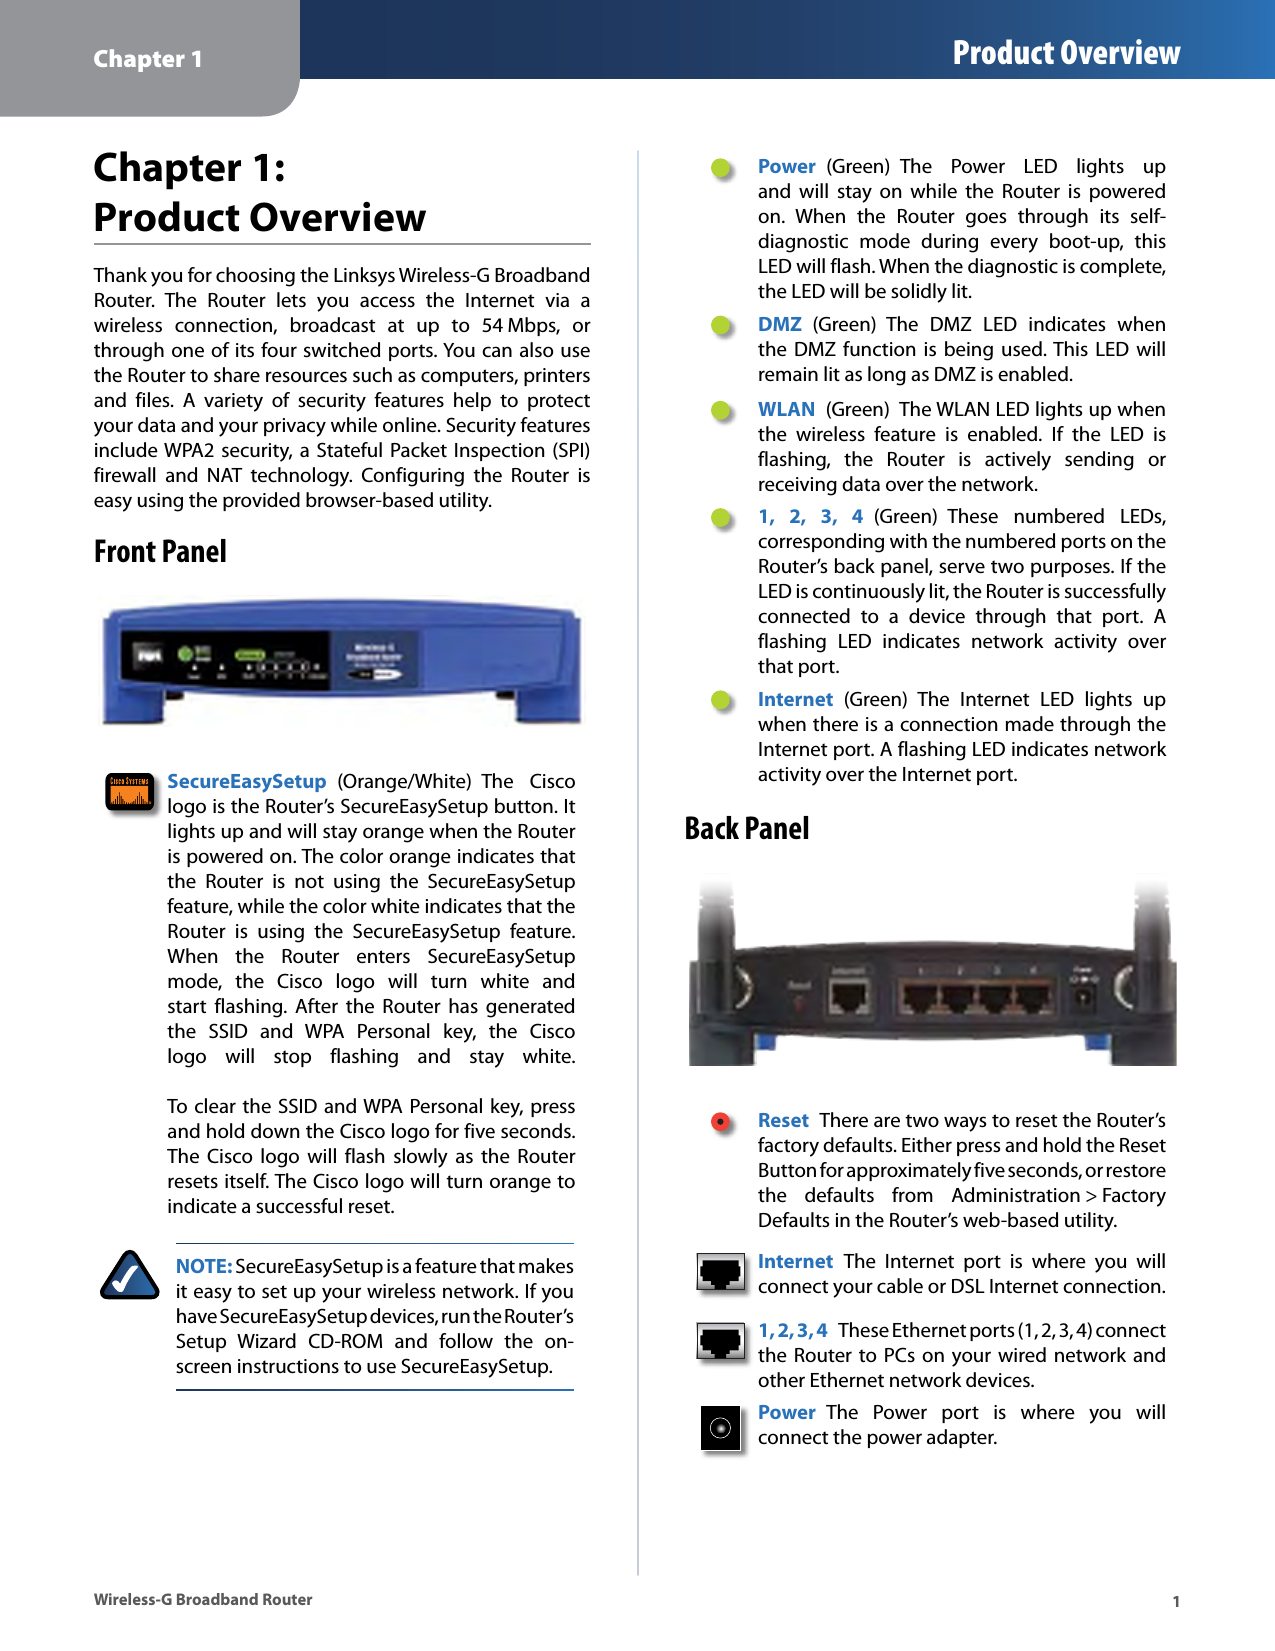 Chapter 1 Product Overview Chapter 1: Product Overview Thank you for choosing the Linksys Wireless-G Broadband Router.  The  Router  lets  you  access  the  Internet  via  a wireless  connection,  broadcast  at  up  to  54 Mbps,  or through one of its four switched ports. You can also use the Router to share resources such as computers, printers and  files.  A  variety  of  security  features  help  to  protect your data and your privacy while online. Security features include WPA2  security, a  Stateful Packet Inspection (SPI) firewall  and  NAT  technology.  Configuring  the  Router  is easy using the provided browser-based utility. Front Panel SecureEasySetup  (Orange/White)  The  Cisco logo is the Router’s SecureEasySetup button. It lights up and will stay orange when the Router is powered on. The color orange indicates that the  Router  is  not  using  the  SecureEasySetup feature, while the color white indicates that the Router  is  using  the  SecureEasySetup  feature. When  the  Router  enters  SecureEasySetup mode,  the  Cisco  logo  will  turn  white  and start  flashing.  After  the  Router  has  generated the  SSID  and  WPA  Personal  key,  the  Cisco logo  will  stop  flashing  and  stay  white. To clear the SSID and WPA Personal key, press and hold down the Cisco logo for five seconds. The  Cisco  logo  will  flash  slowly  as  the  Router resets itself. The Cisco logo will turn orange to indicate a successful reset. NOTE: SecureEasySetup is a feature that makes it easy to set up your wireless network. If you have SecureEasySetup devices, run the Router’s Setup  Wizard  CD-ROM  and  follow  the  on-screen instructions to use SecureEasySetup. Power  (Green)  The  Power  LED  lights  up and  will  stay  on  while  the  Router  is  powered on.  When  the  Router  goes  through  its  self-diagnostic  mode  during  every  boot-up,  this LED will flash. When the diagnostic is complete, the LED will be solidly lit. DMZ  (Green)  The  DMZ  LED  indicates  when the DMZ function  is  being used. This  LED  will remain lit as long as DMZ is enabled. WLAN  (Green)  The WLAN LED lights up when the  wireless  feature  is  enabled.  If  the  LED  is flashing,  the  Router  is  actively  sending  or receiving data over the network. 1,  2,  3,  4  (Green)  These  numbered  LEDs, corresponding with the numbered ports on the Router’s back panel, serve two purposes. If the LED is continuously lit, the Router is successfully connected  to  a  device  through  that  port.  A flashing  LED  indicates  network  activity  over that port. Internet  (Green)  The  Internet  LED  lights  up when there is a connection made through the Internet port. A flashing LED indicates network activity over the Internet port. Back Panel Reset  There are two ways to reset the Router’s factory defaults. Either press and hold the Reset Button for approximately five seconds, or restore the  defaults  from  Administration &gt; Factory Defaults in the Router’s web-based utility. Internet  The  Internet  port  is  where  you  will connect your cable or DSL Internet connection. 1, 2, 3, 4  These Ethernet ports (1, 2, 3, 4) connect the Router to PCs on your wired network and other Ethernet network devices. Power  The  Power  port  is  where  you  will connect the power adapter. Wireless-G Broadband Router  1 